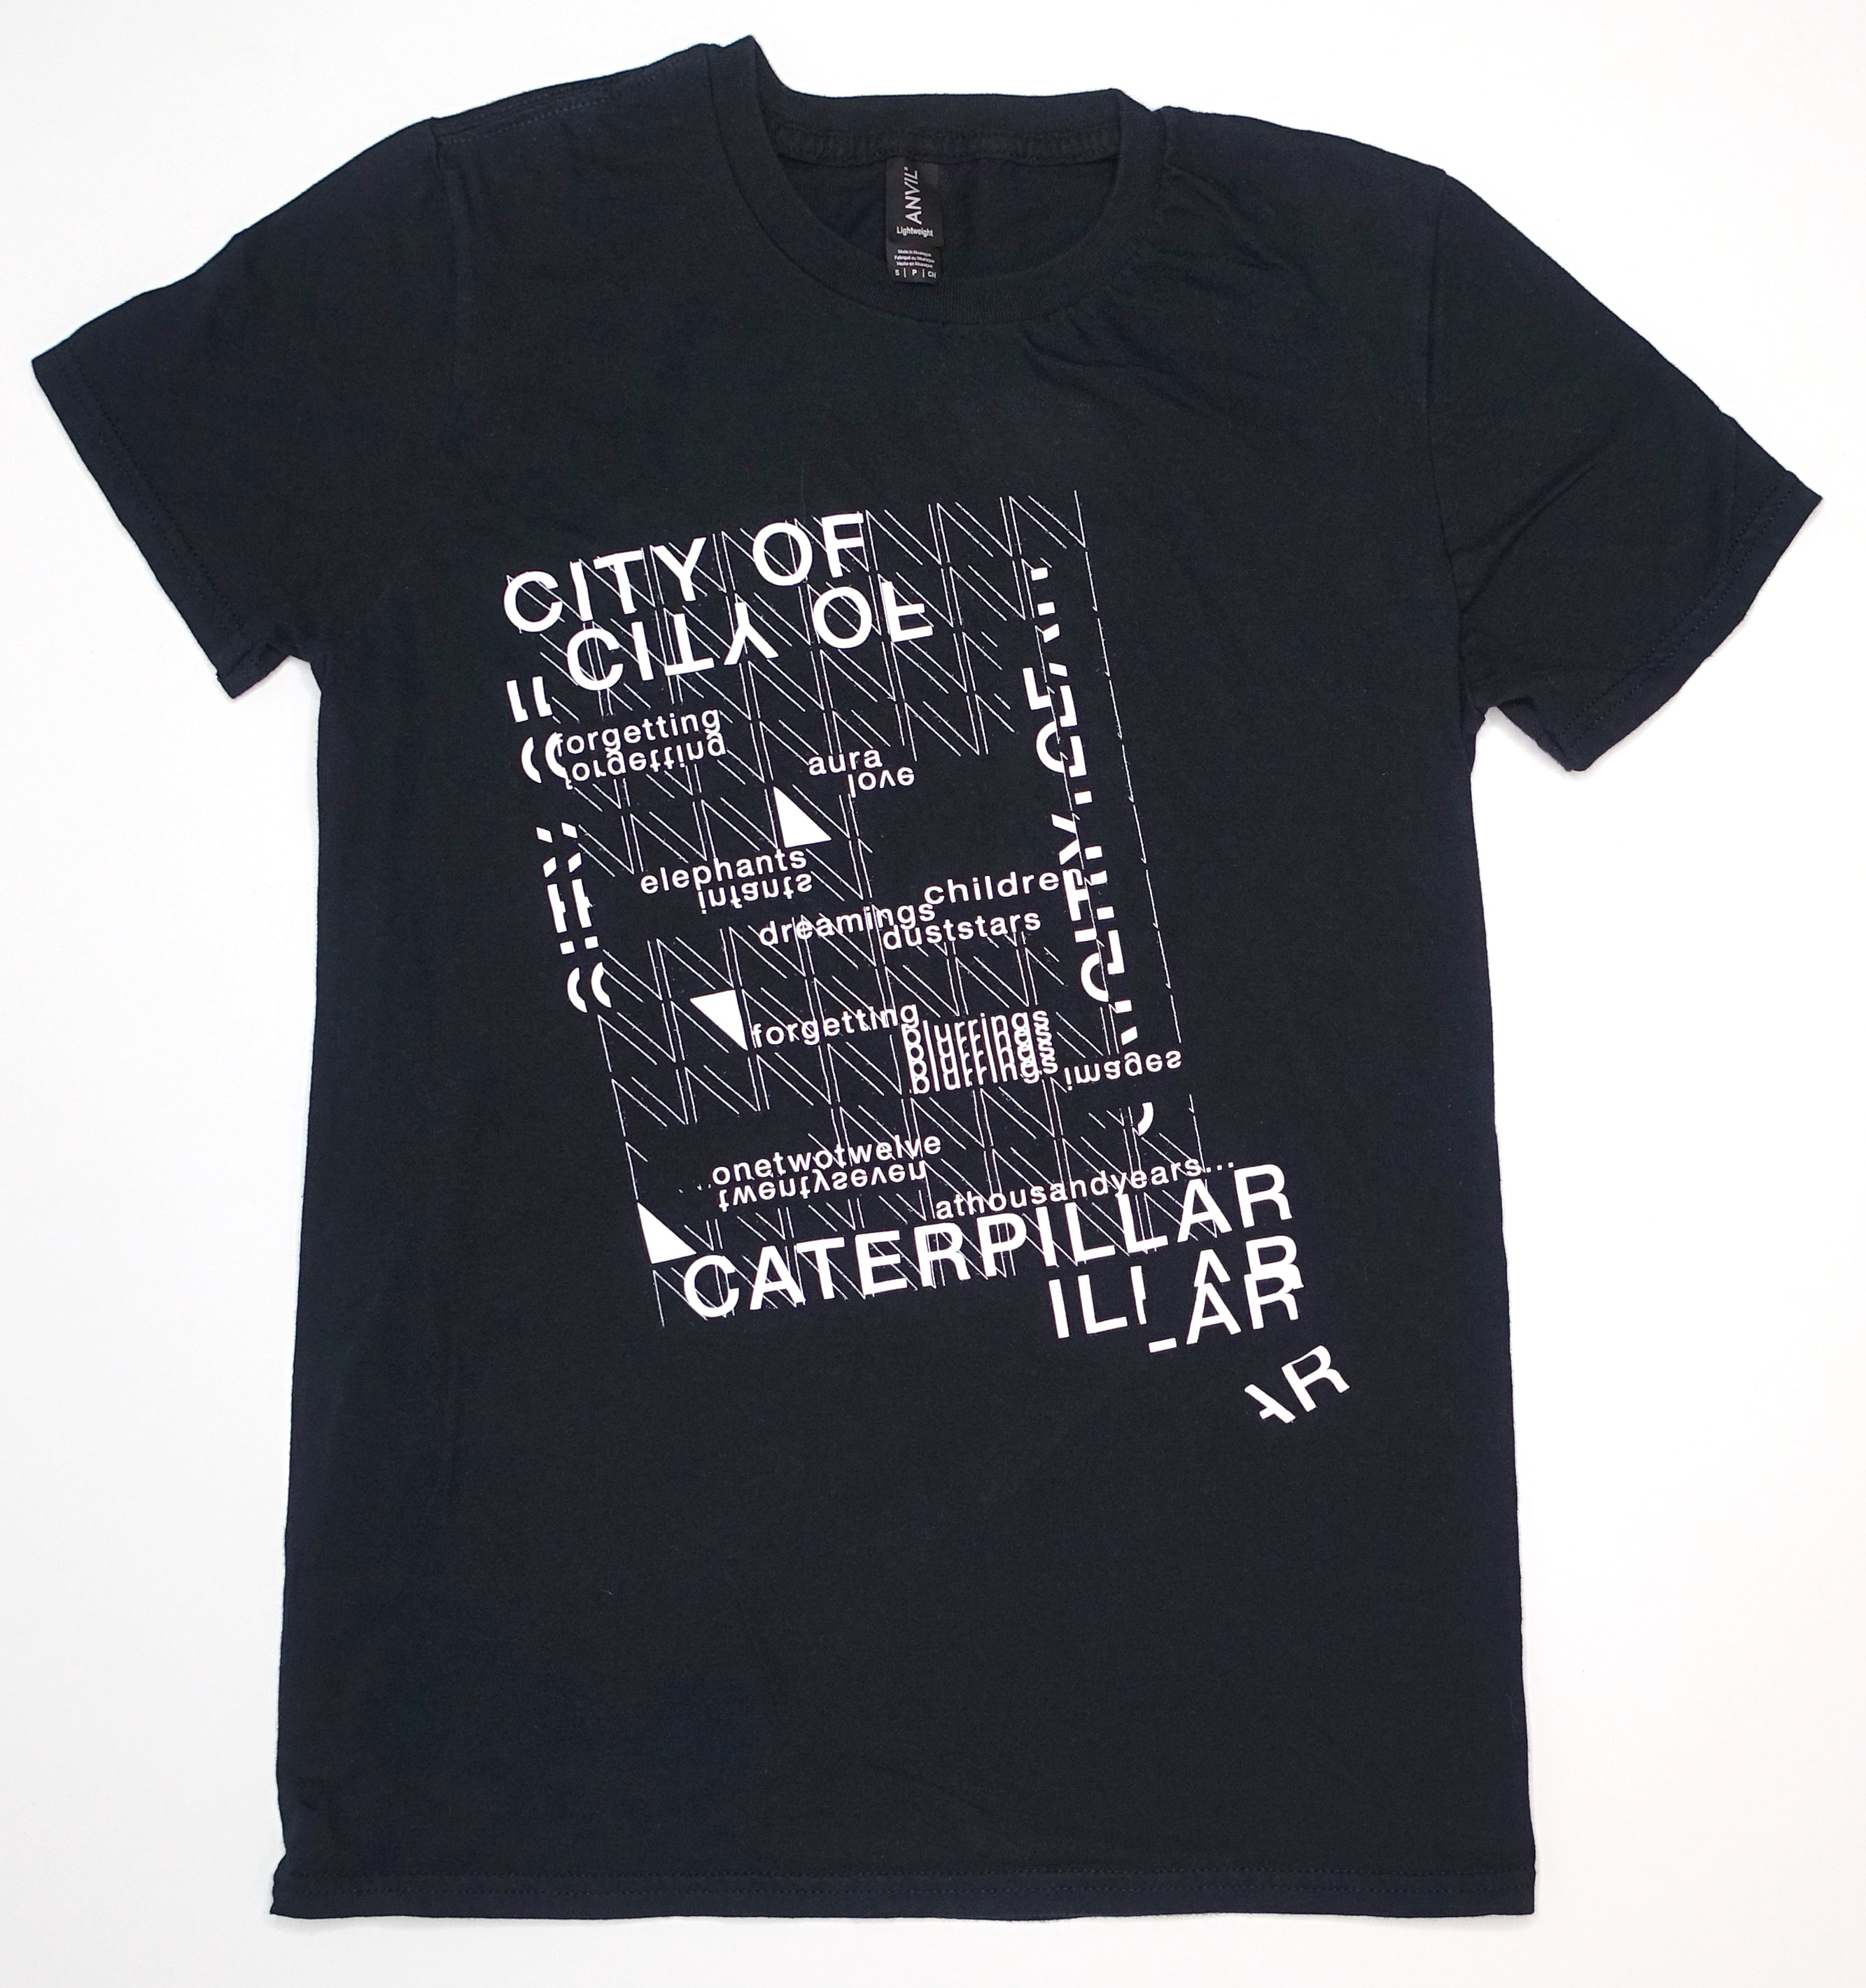 City Of Caterpillar – Driving Spain Up A Wall 2017 Shirt Size Small